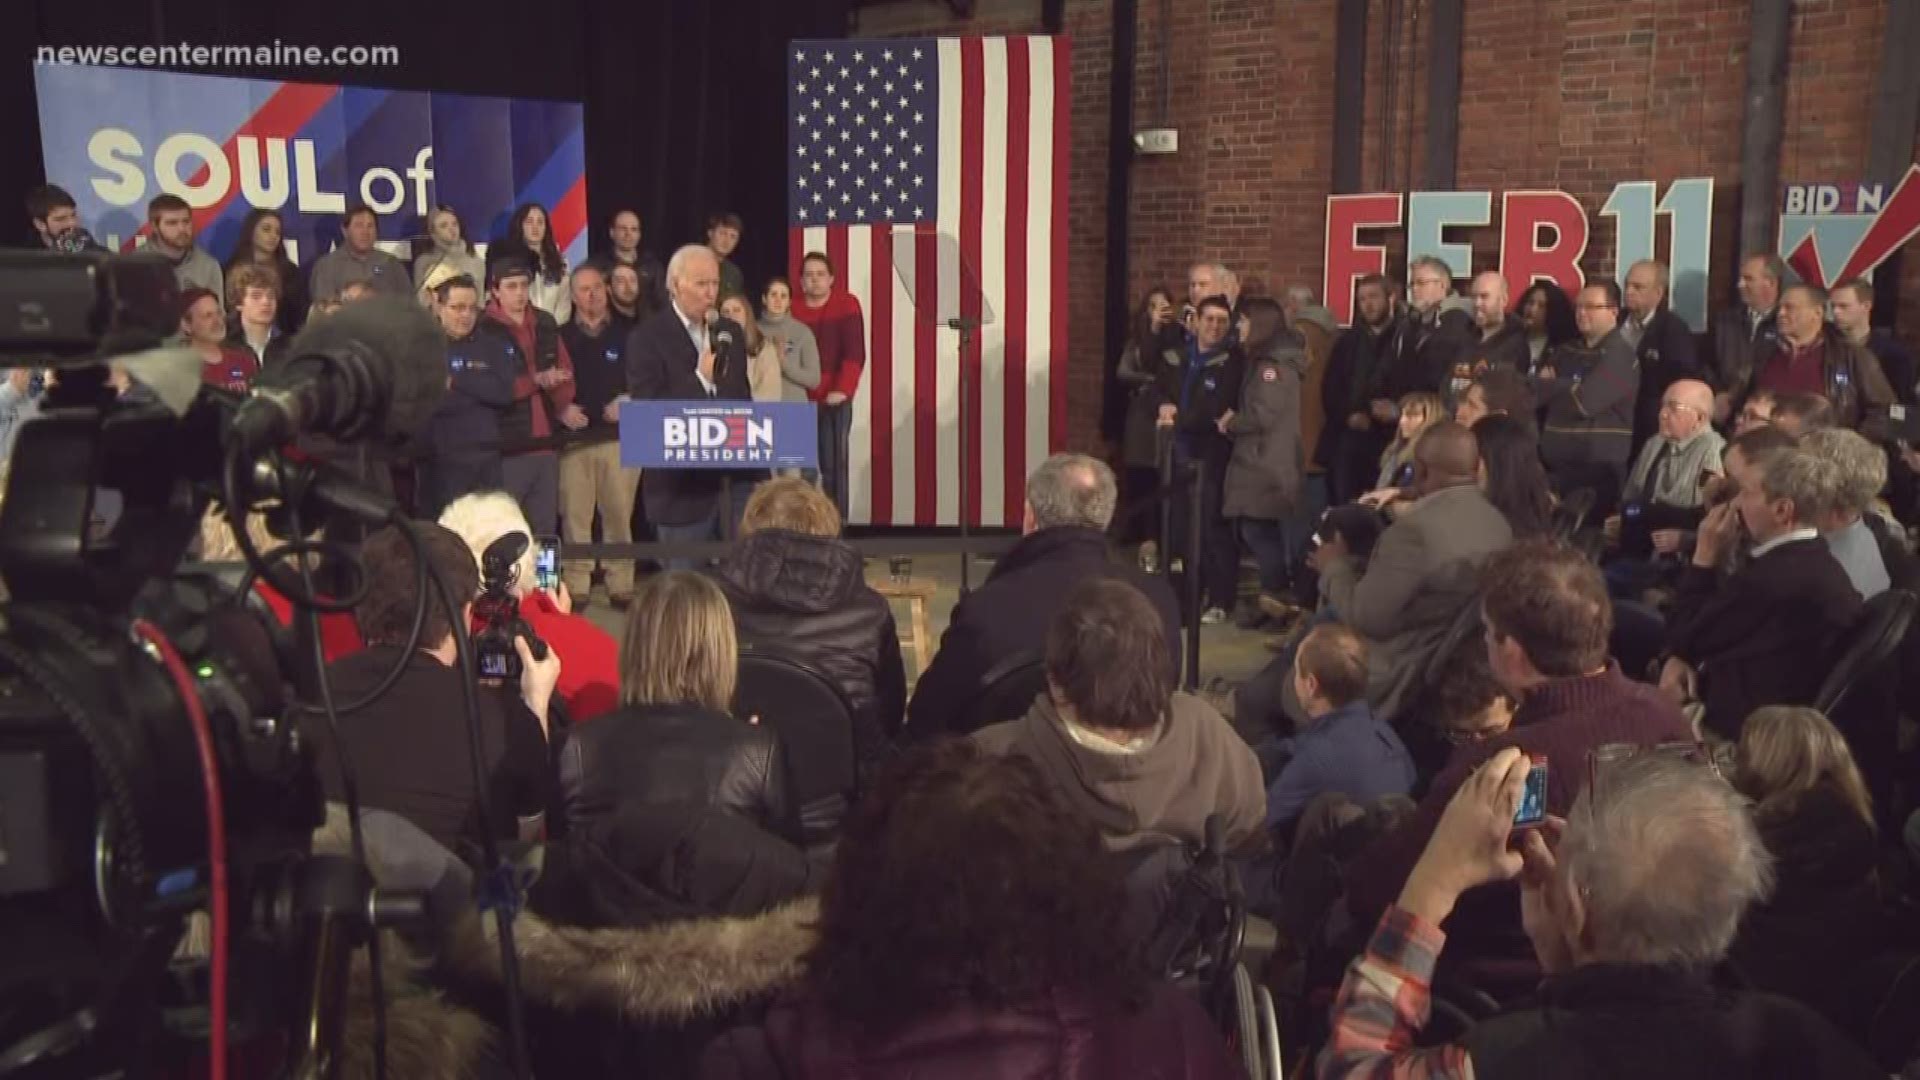 Joe Biden and Elizabeth Warren spent the day rallying supporters, both in need to gain more votes.